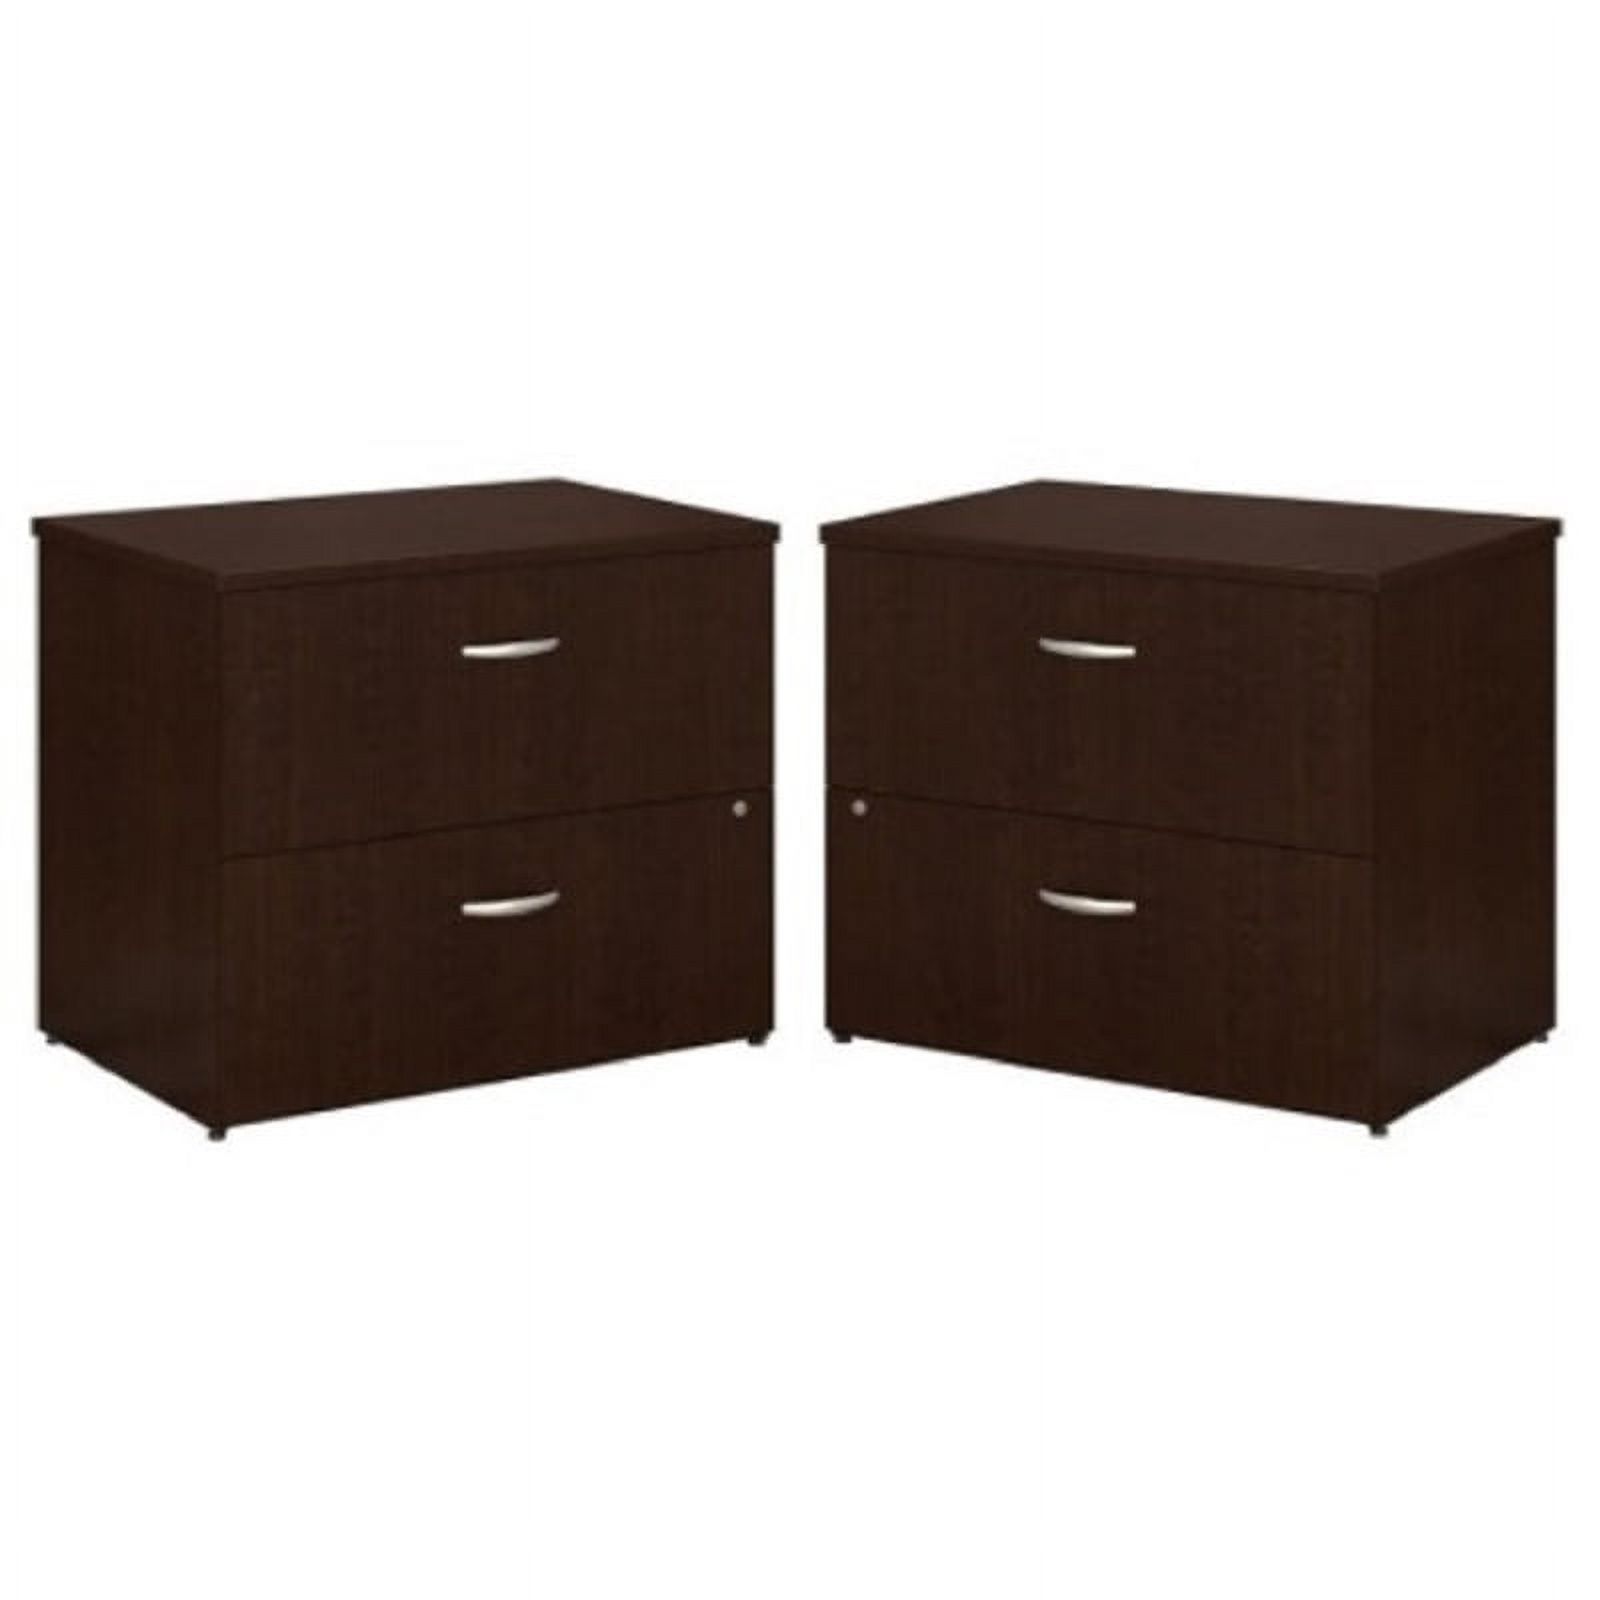 Home Square 2 Piece Wood Filing Cabinet Set with 2 Drawer in Mocha Cherry - image 1 of 9